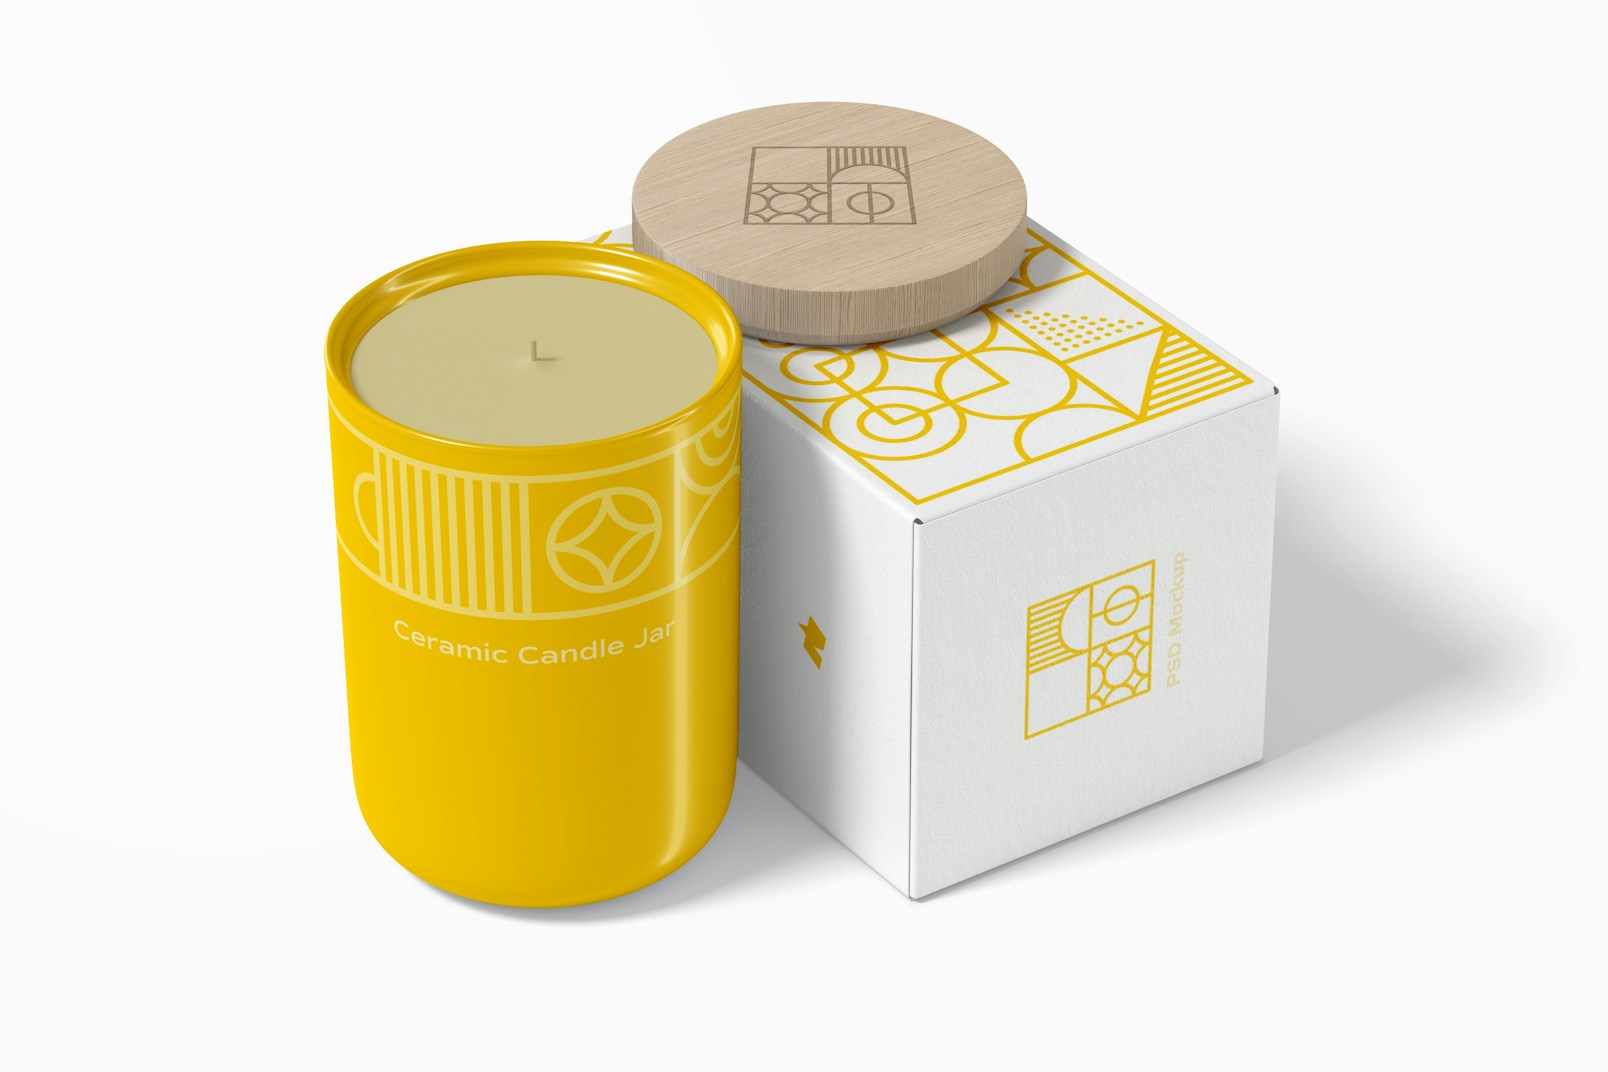 Ceramic Candle Jar with Box Mockup, Perspective View